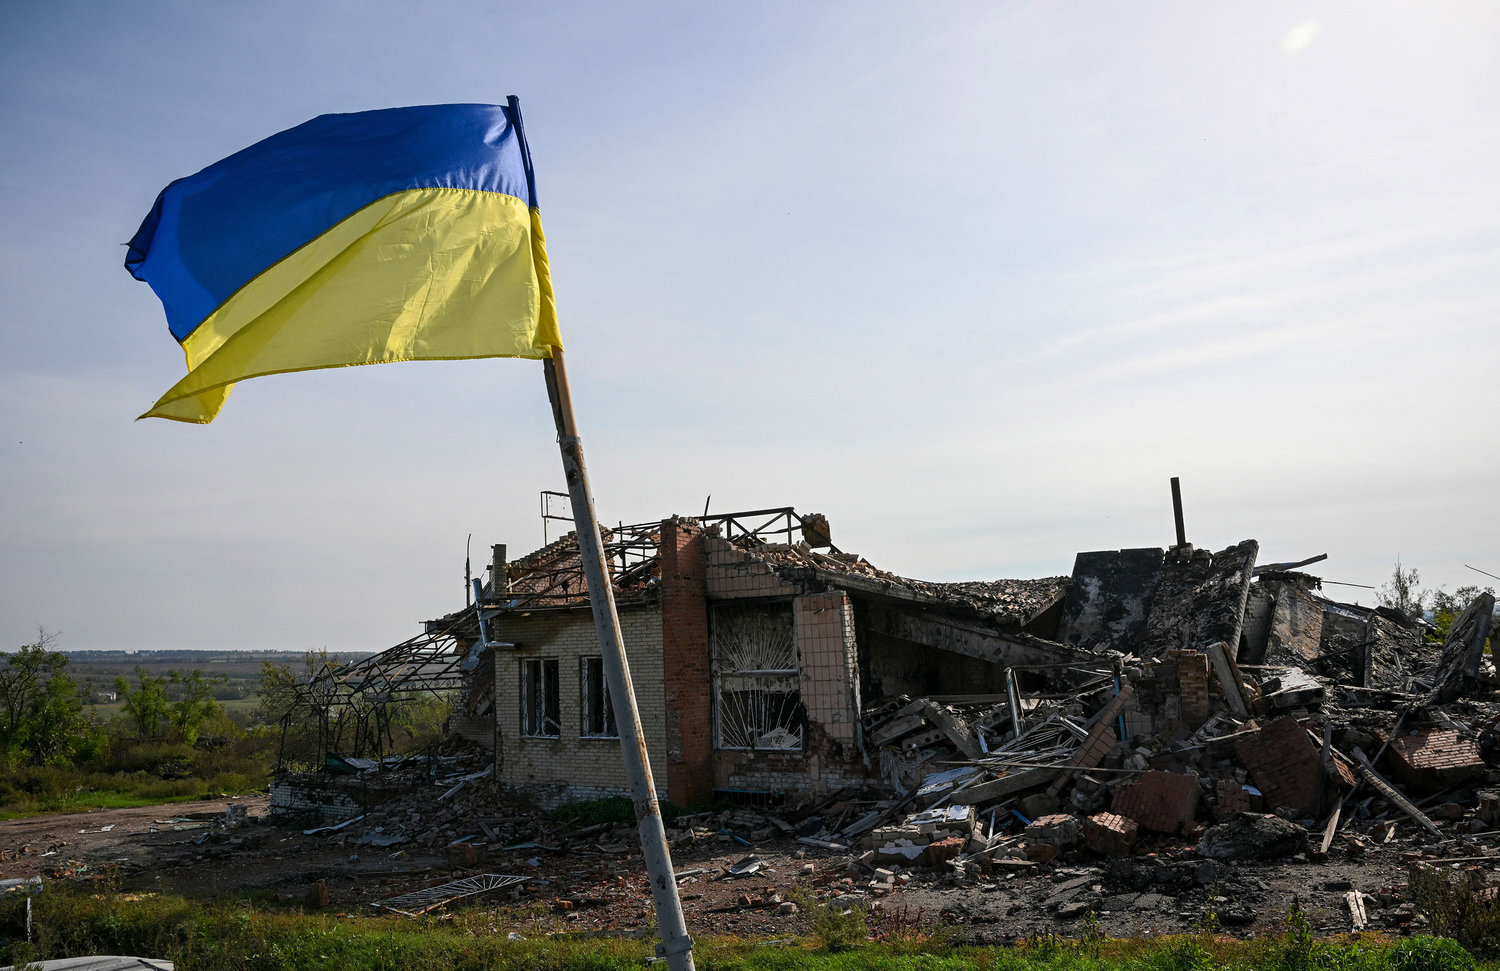 A Ukrainian national flag is displayed in front of a destroyed house near Izyum, eastern Ukraine, on Saturday, Oct. 1, 2022, amid the Russian invasion of Ukraine. (Juan Barreto/AFP/Getty Images/TNS)